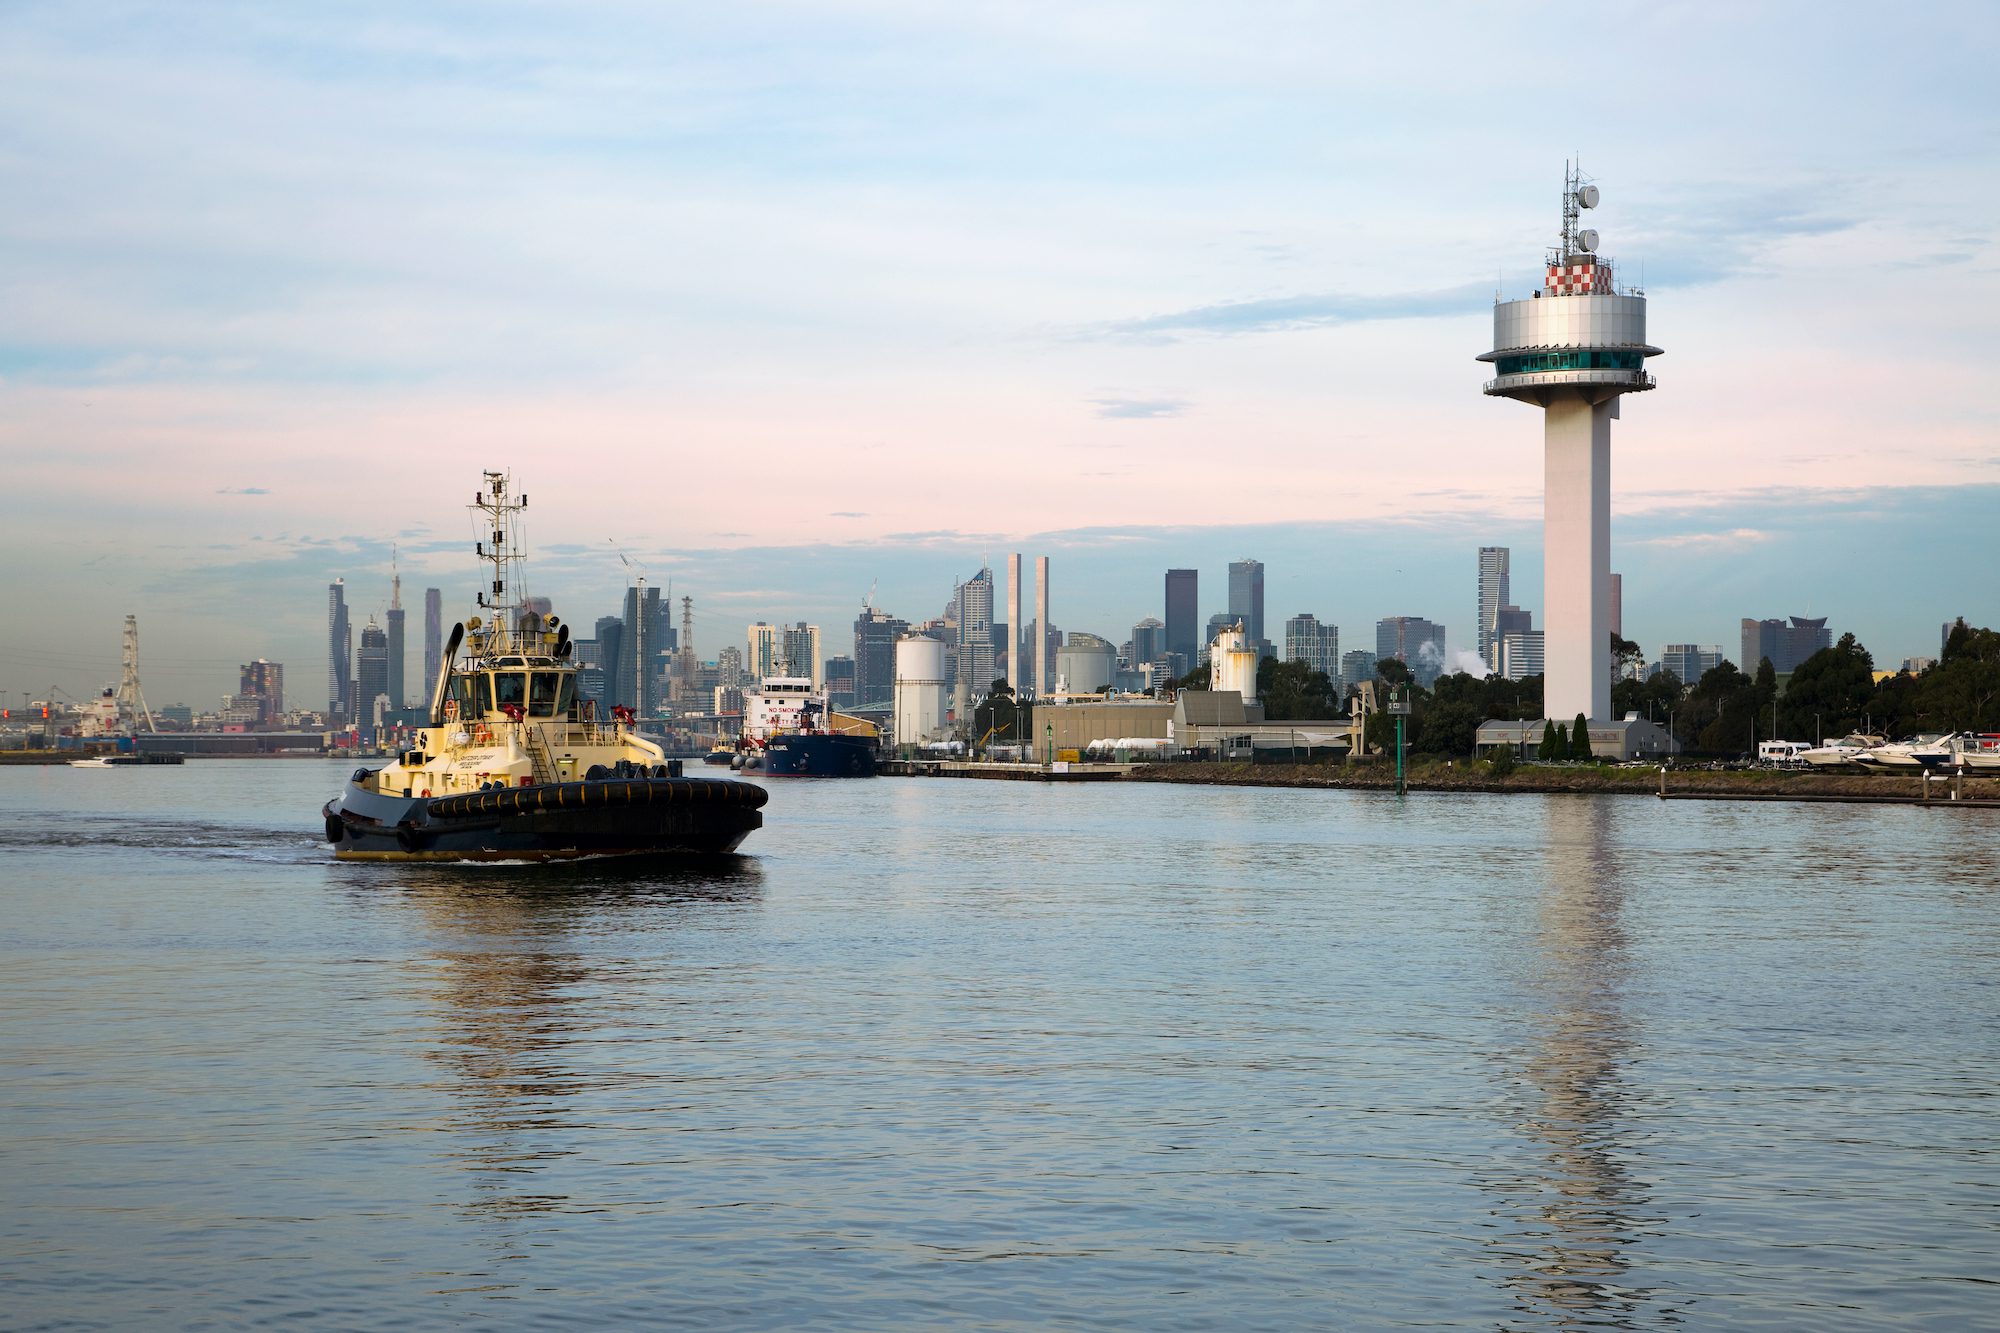 Svitzer Planning Lockout of Australian Harbor Tug Crews in Dispute with Unions